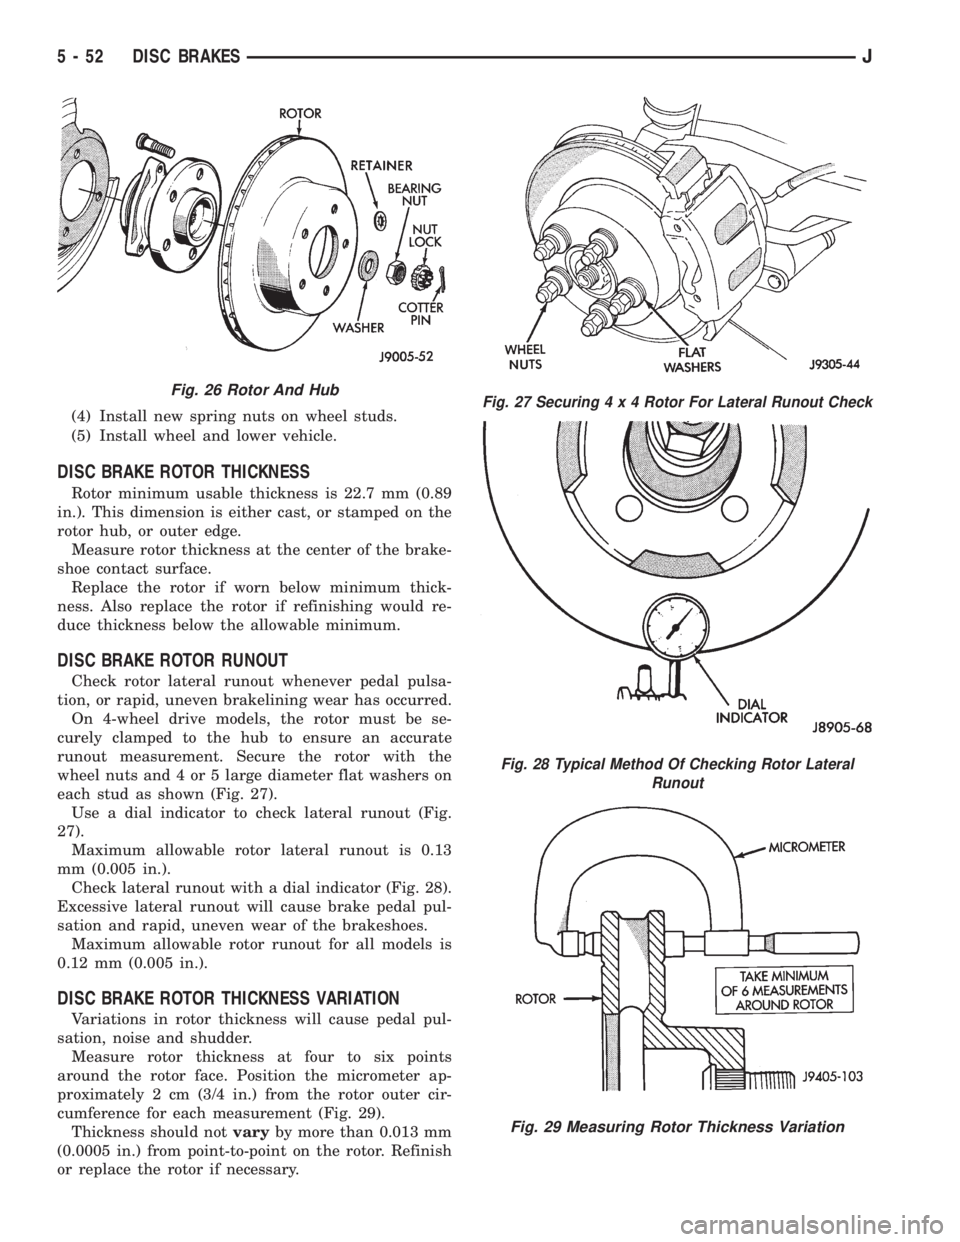 JEEP YJ 1995  Service And Repair Manual (4) Install new spring nuts on wheel studs.
(5) Install wheel and lower vehicle.
DISC BRAKE ROTOR THICKNESS
Rotor minimum usable thickness is 22.7 mm (0.89
in.). This dimension is either cast, or stam